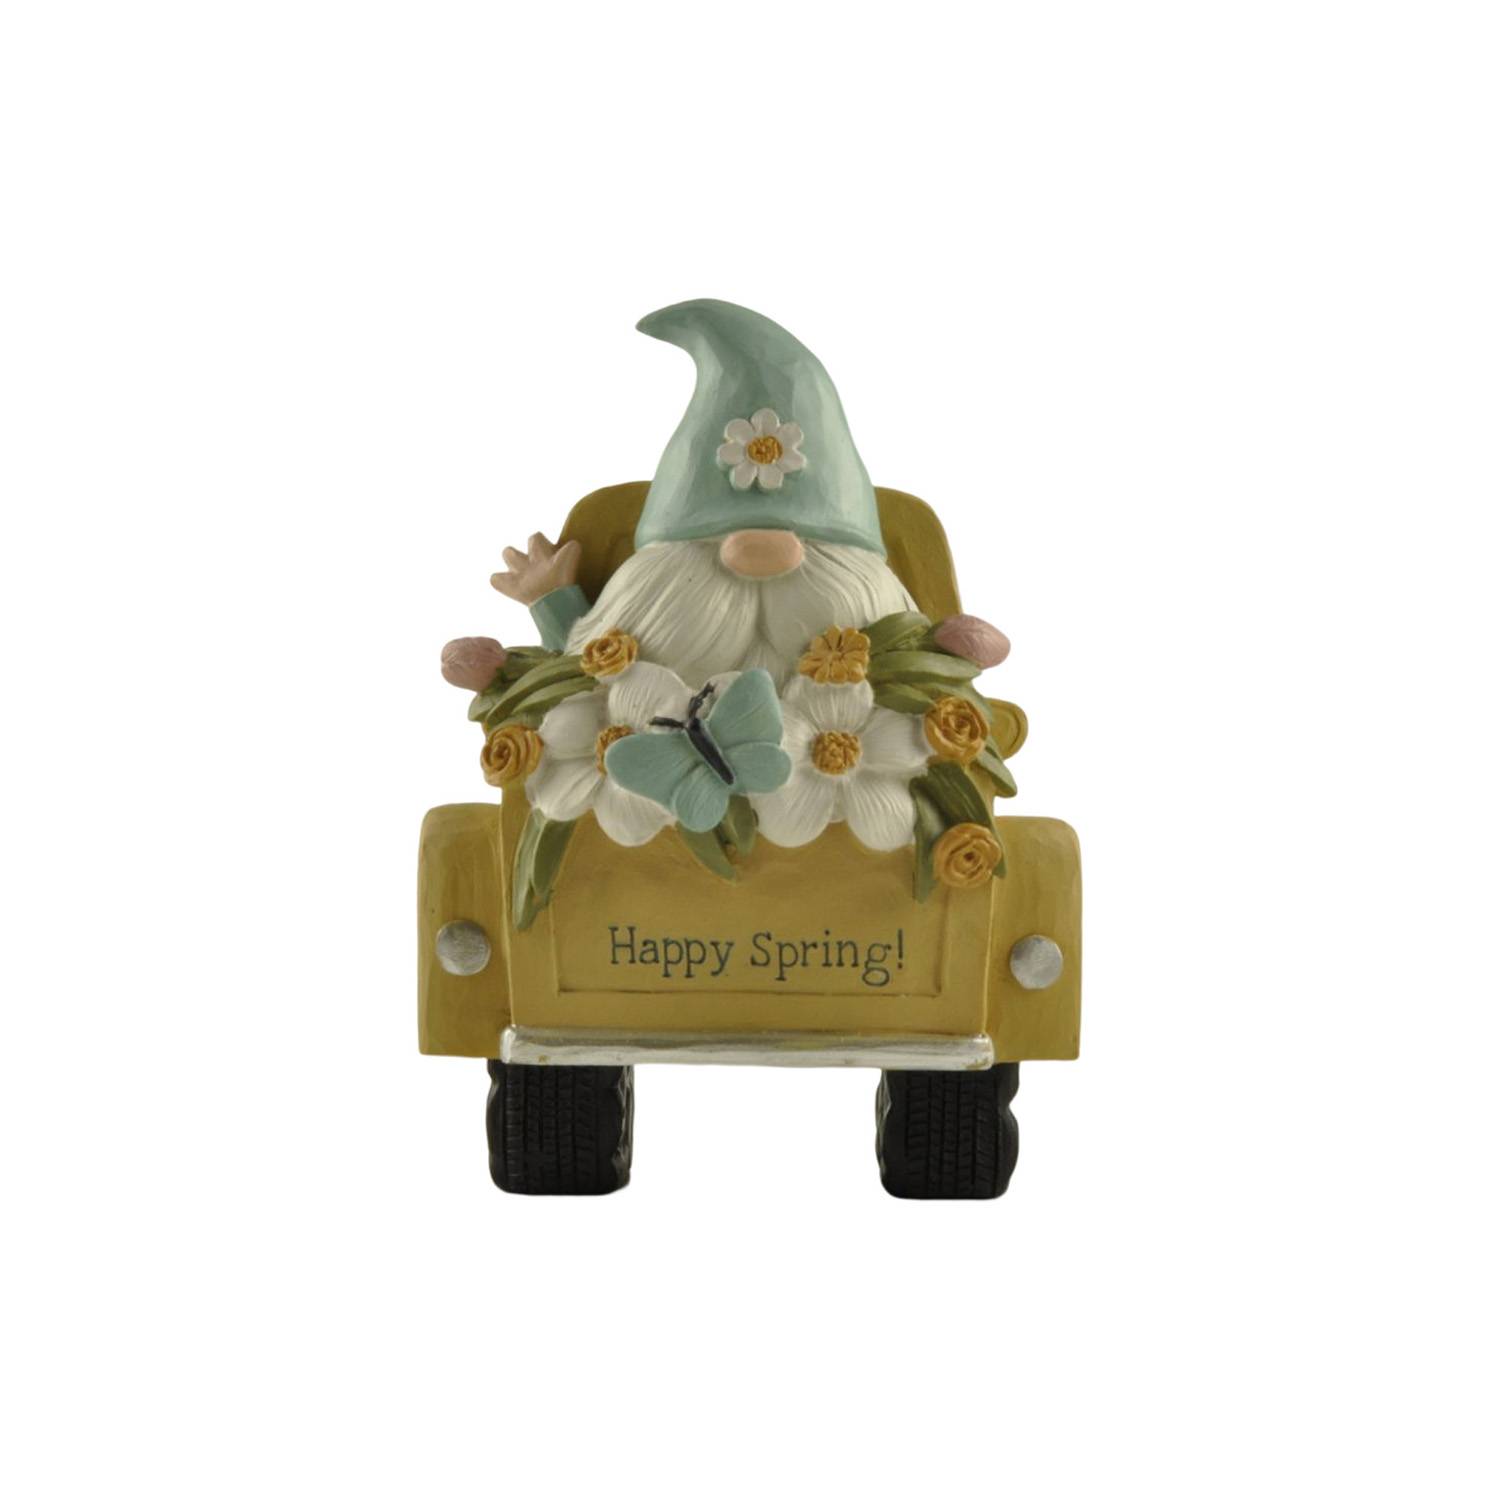 adorable resin statues free sample for house decor-1